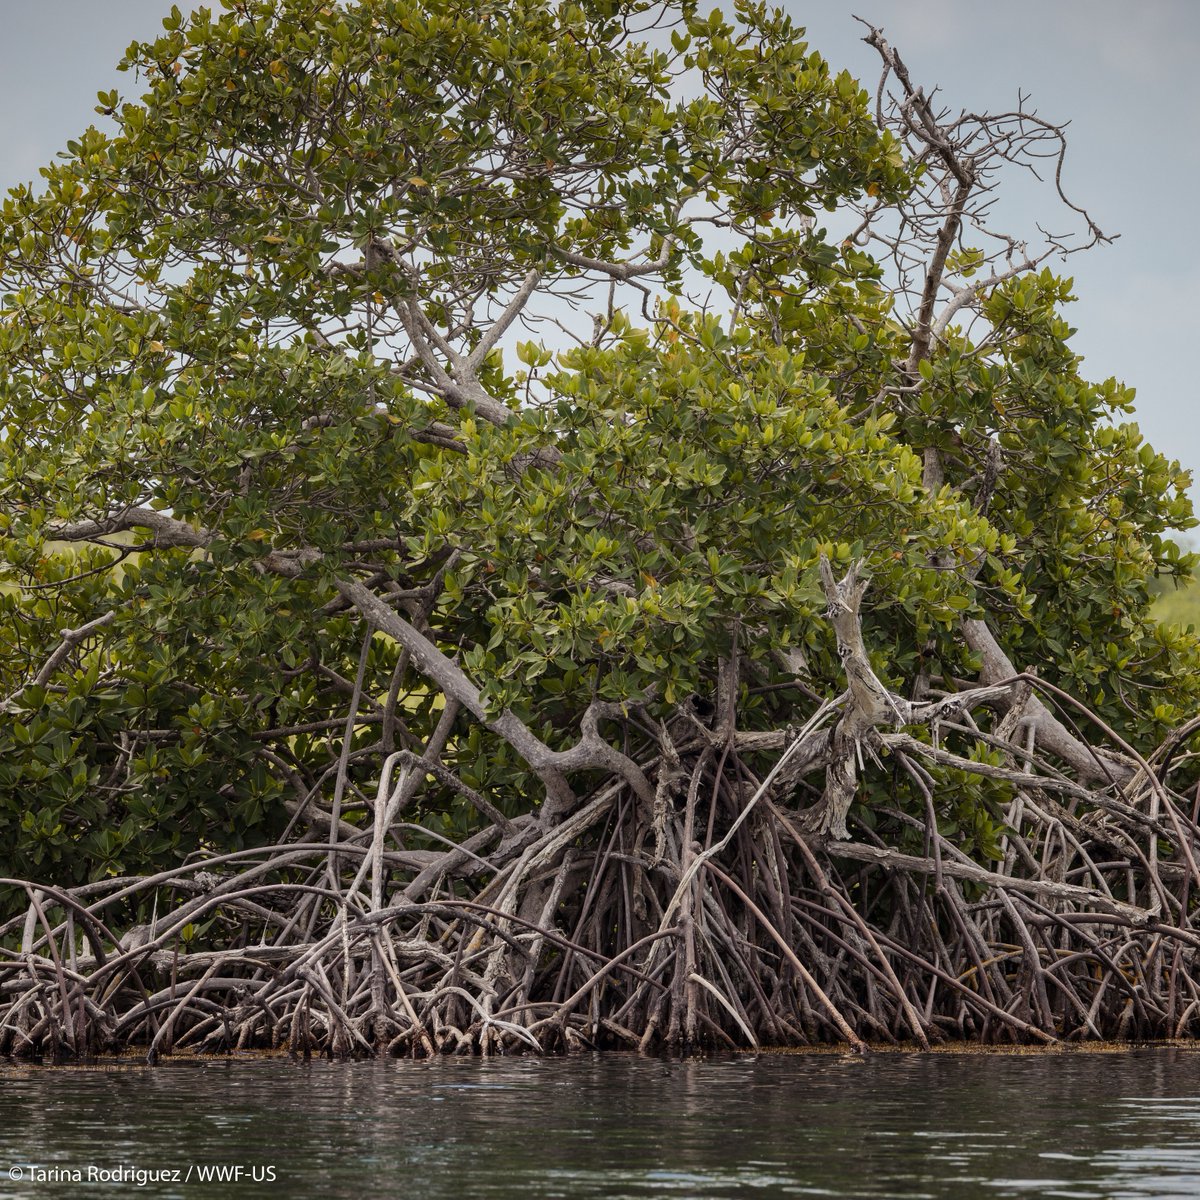 Mangrove forests can help us mitigate and adapt to climate change. WWF and partners have developed a new method, known as the “Climate-Smart Mangrove Tool,” to help give these coastal forests the best chance to thrive in a changing climate: wwf.to/3JOj2G5.